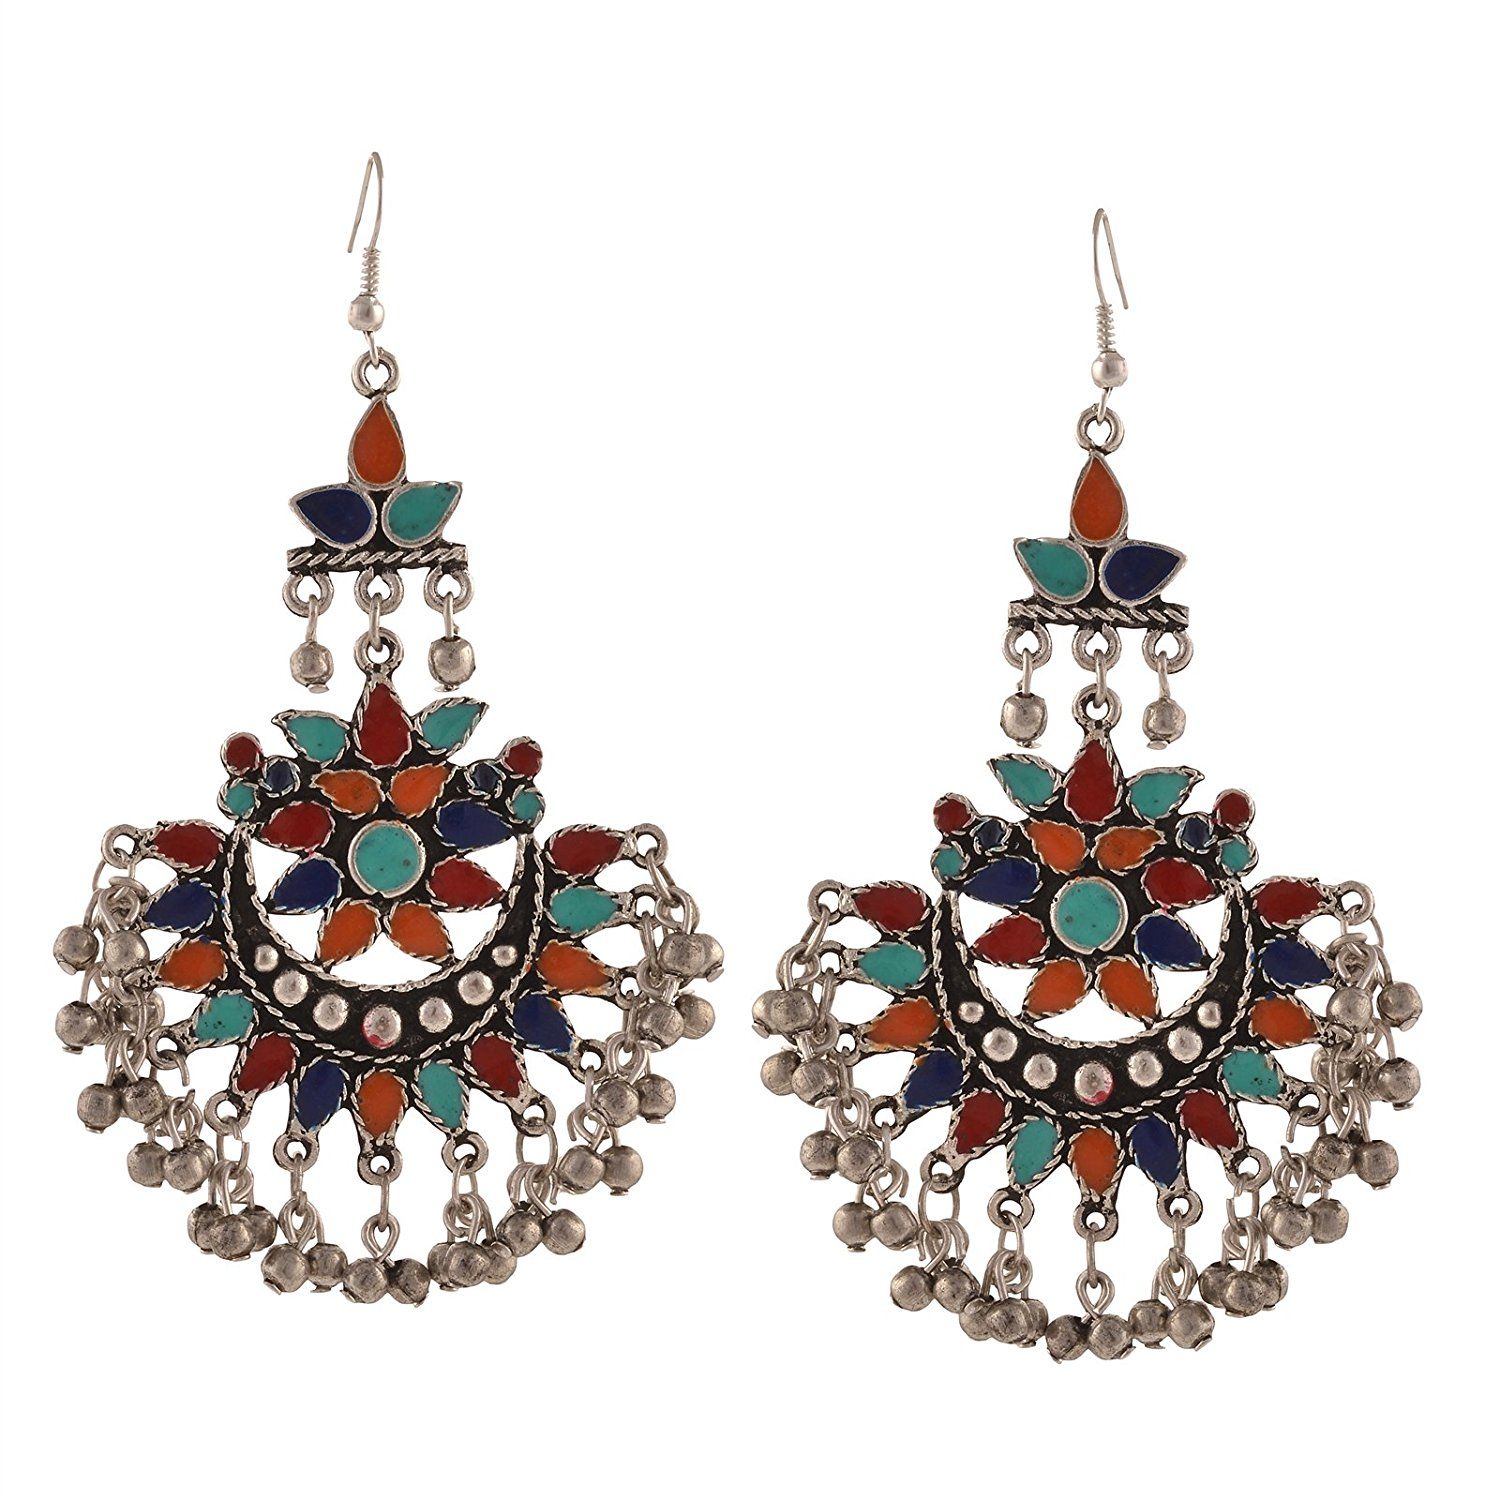 Buy Crunchy Fashion Oxidised Silver Multicolored Afghan Earrings For Women - Purplle